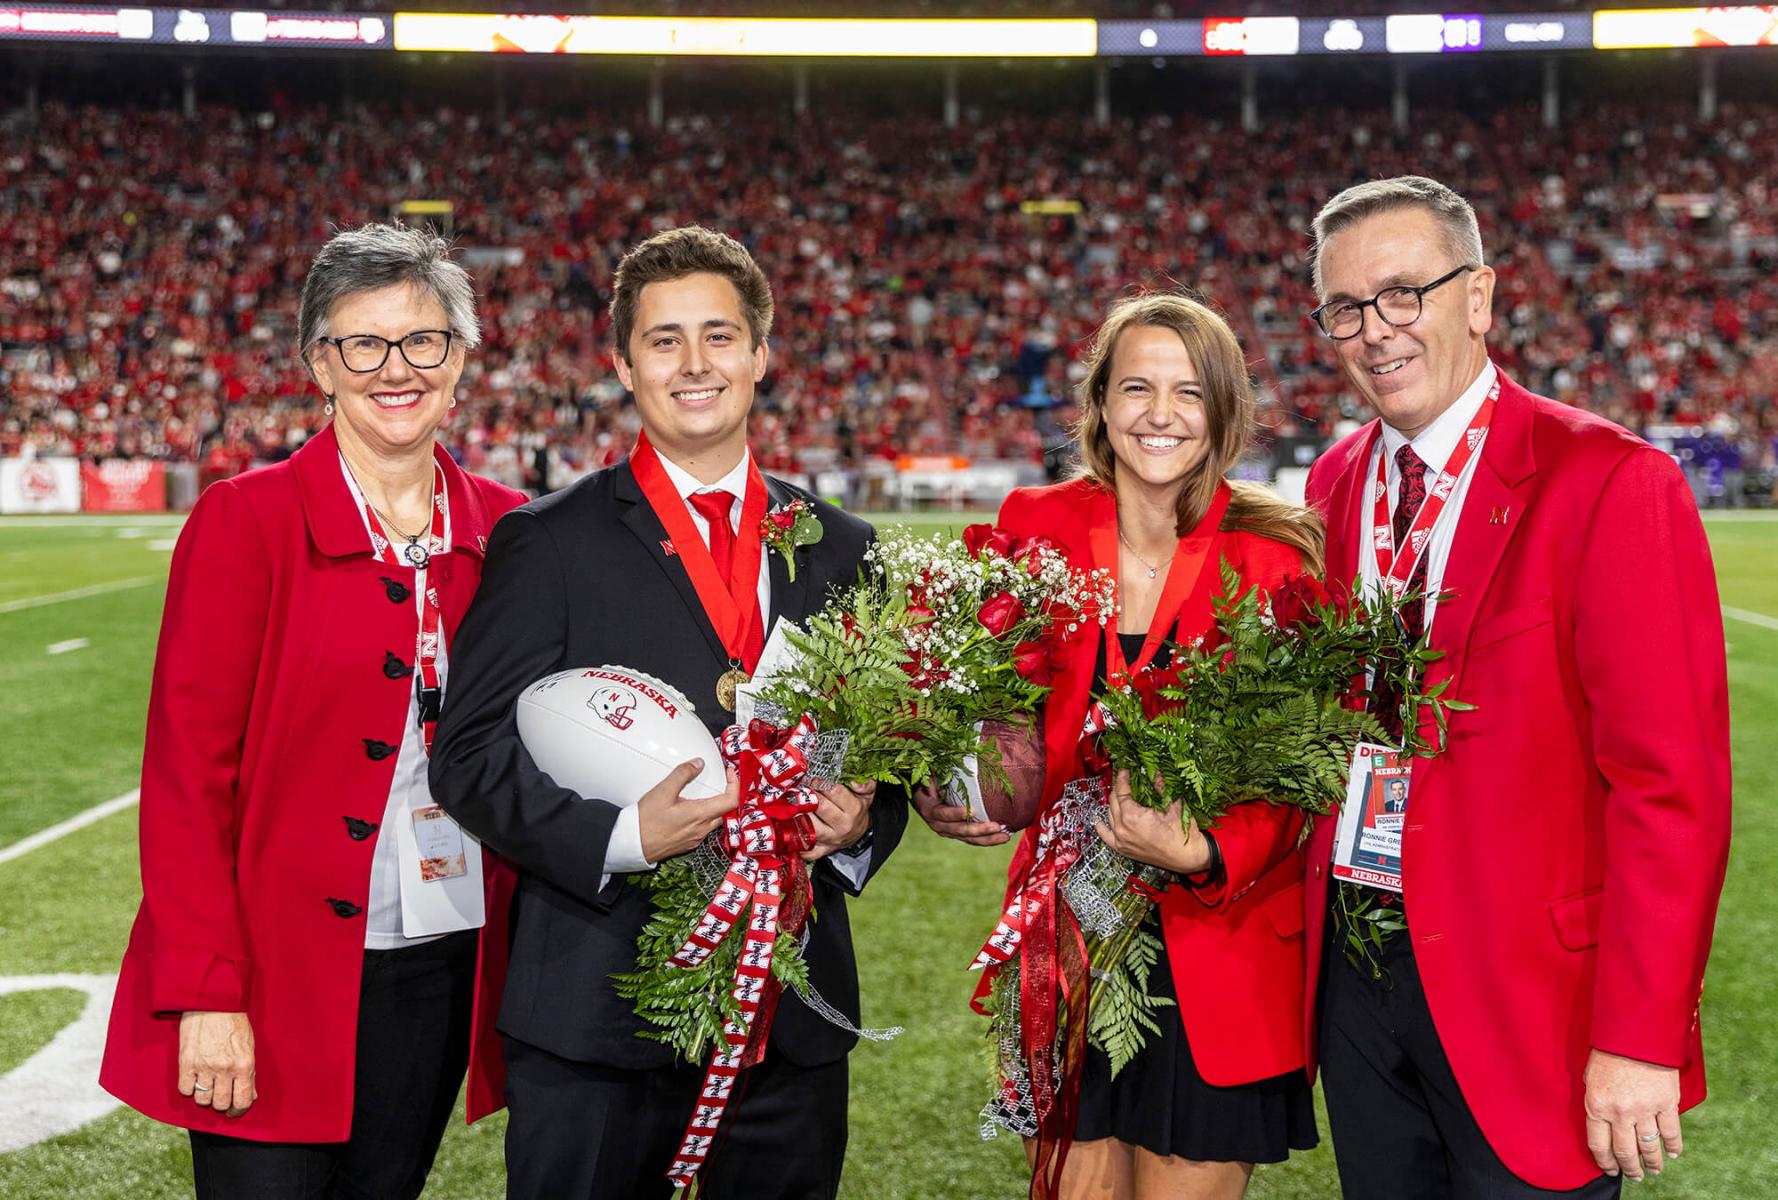 Chancellor Ronnie Green and his wife Jane with homecoming royalty